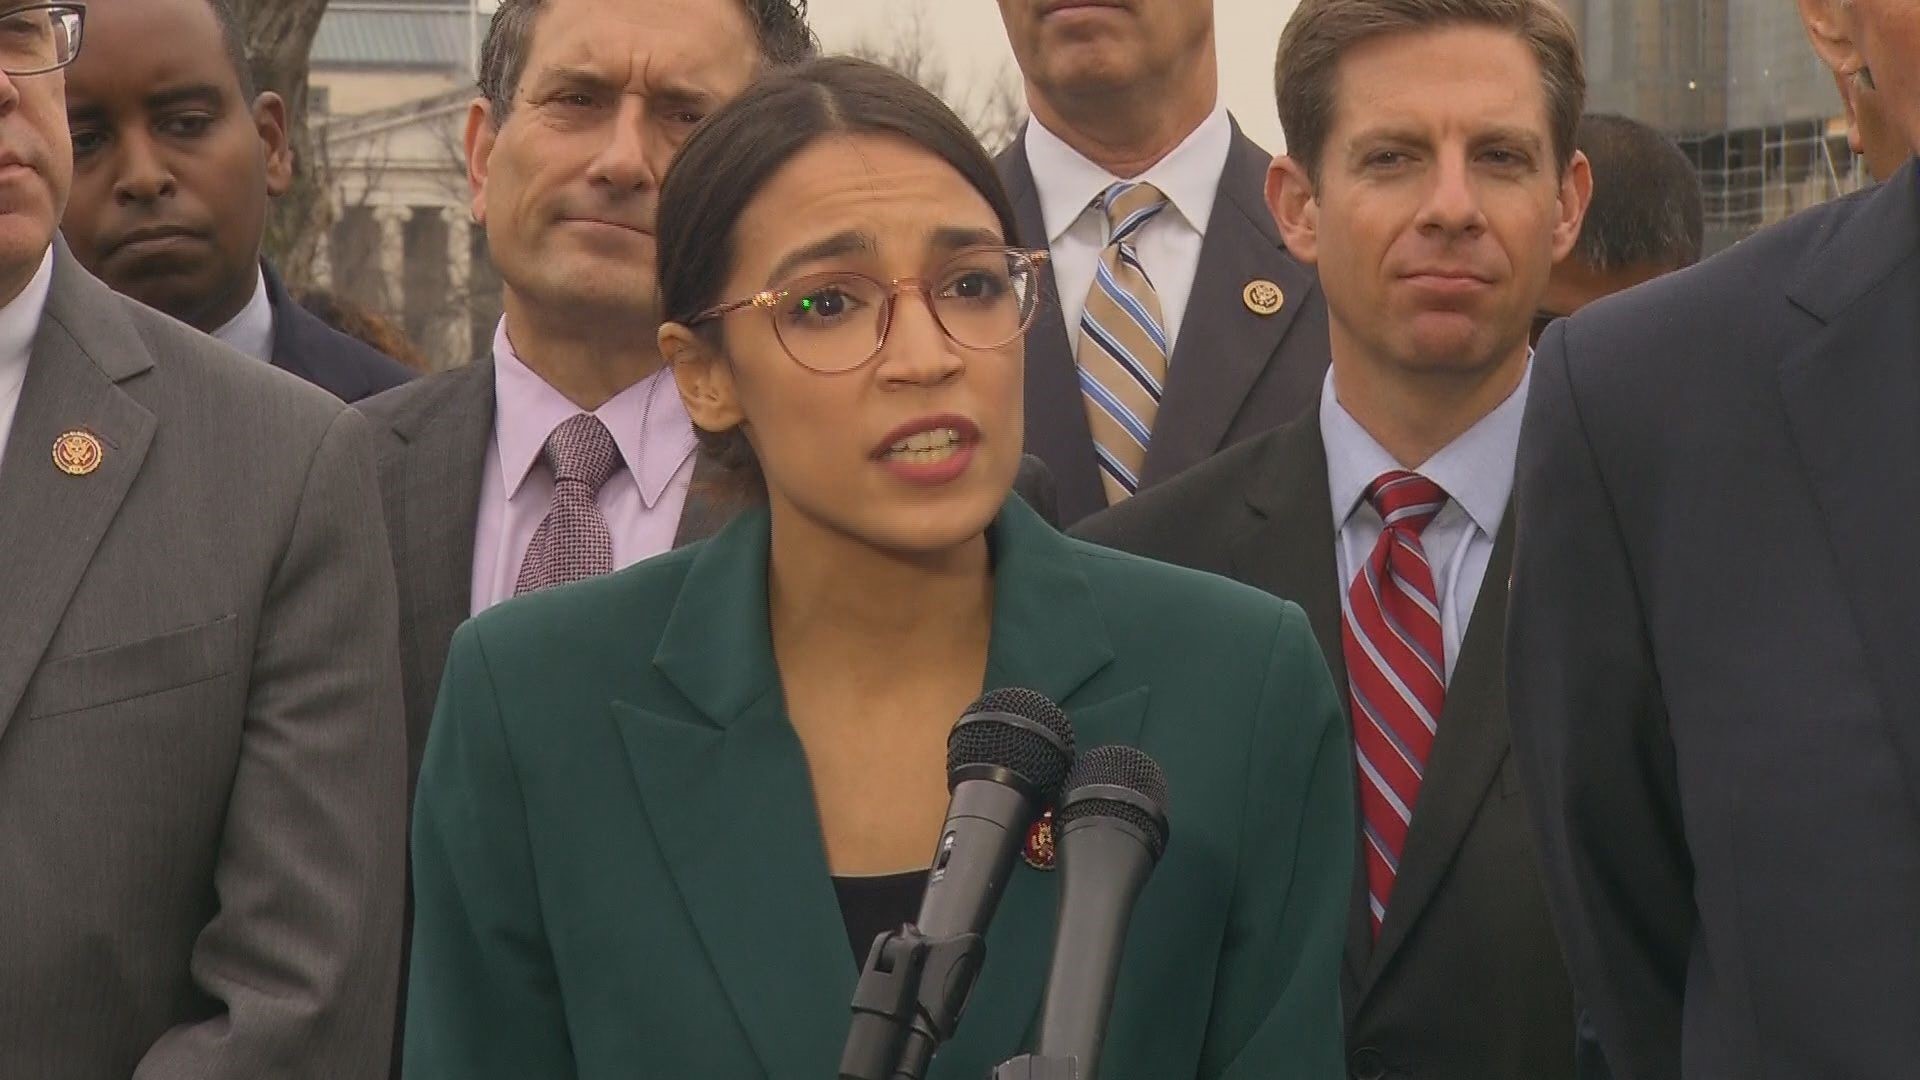 Rep. Alexandria Ocasio-Cortez (D-New York) and fellow Democrats introduced a joint resolution which sets a goal to meet all power demand in the U.S. through clean, renewable and zero-emission energy sources by 2030.